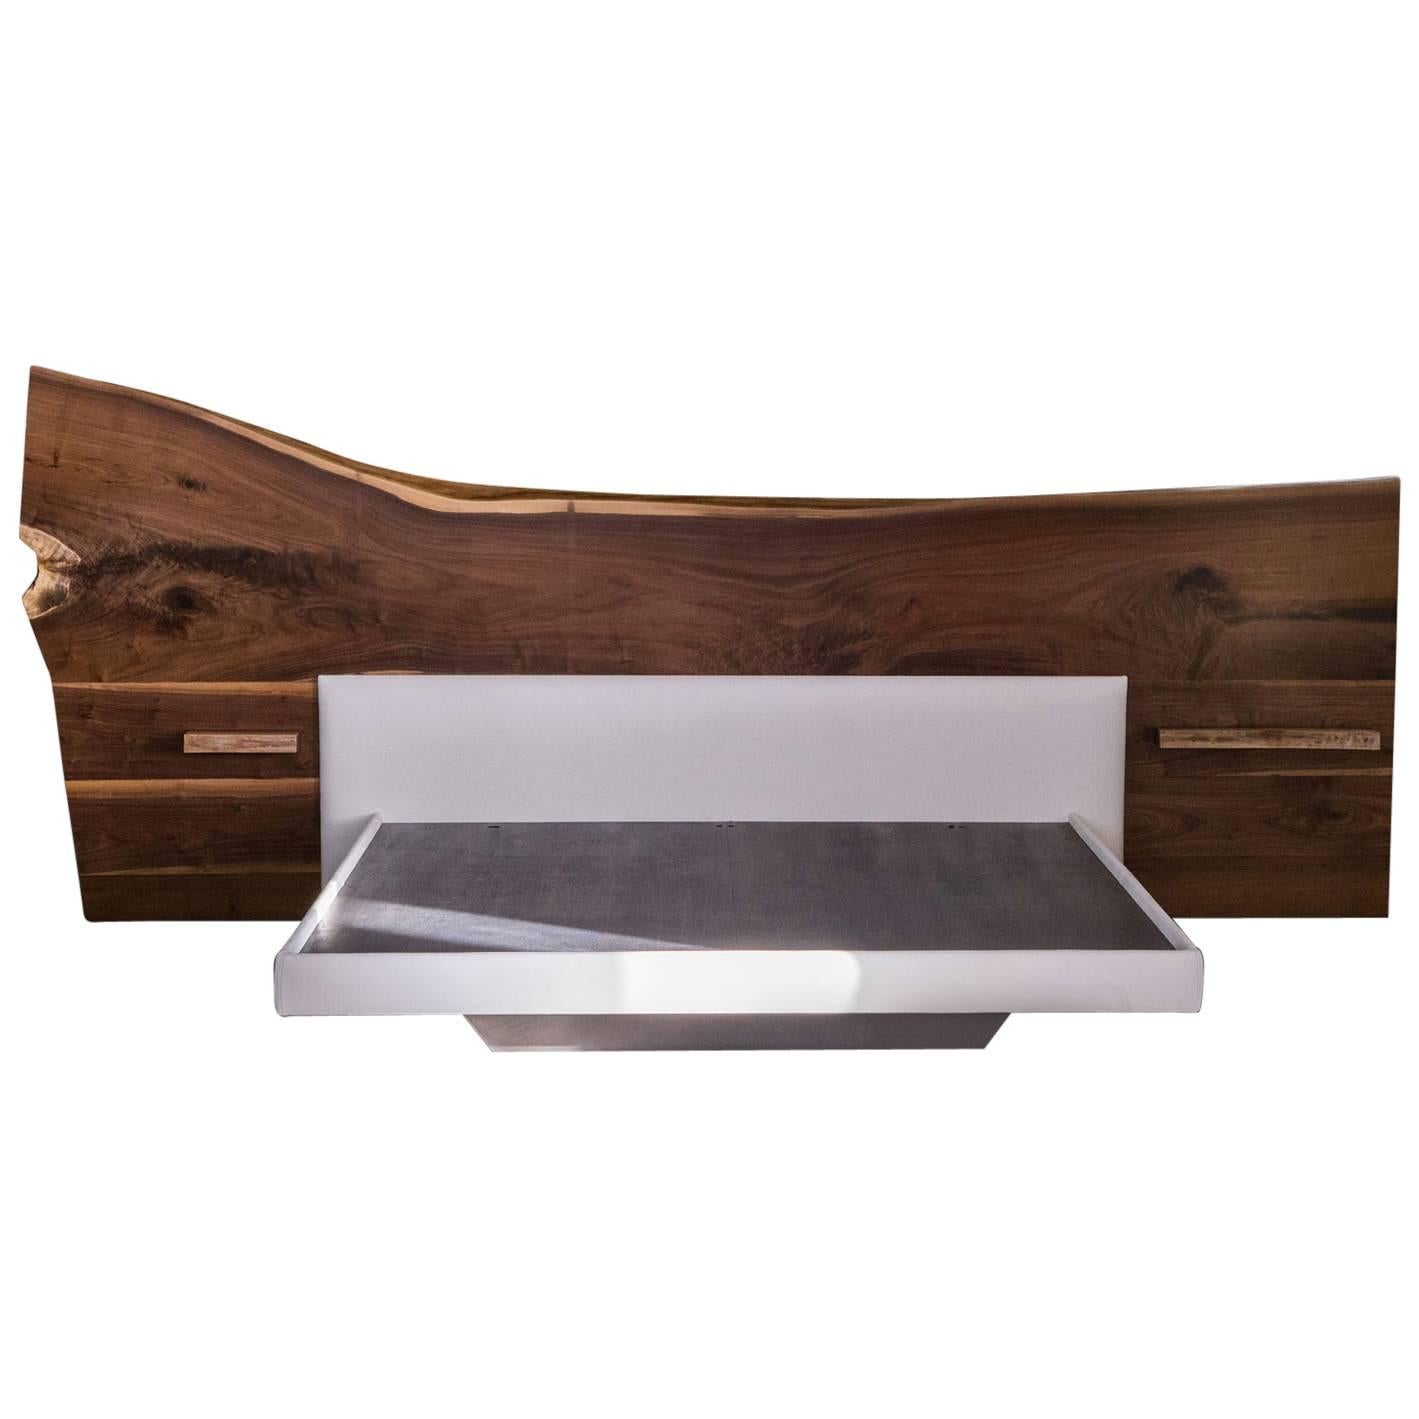 Sentient Live-Edge Bed Black American Walnut Slab Queen-Sized Leather Upholstery For Sale